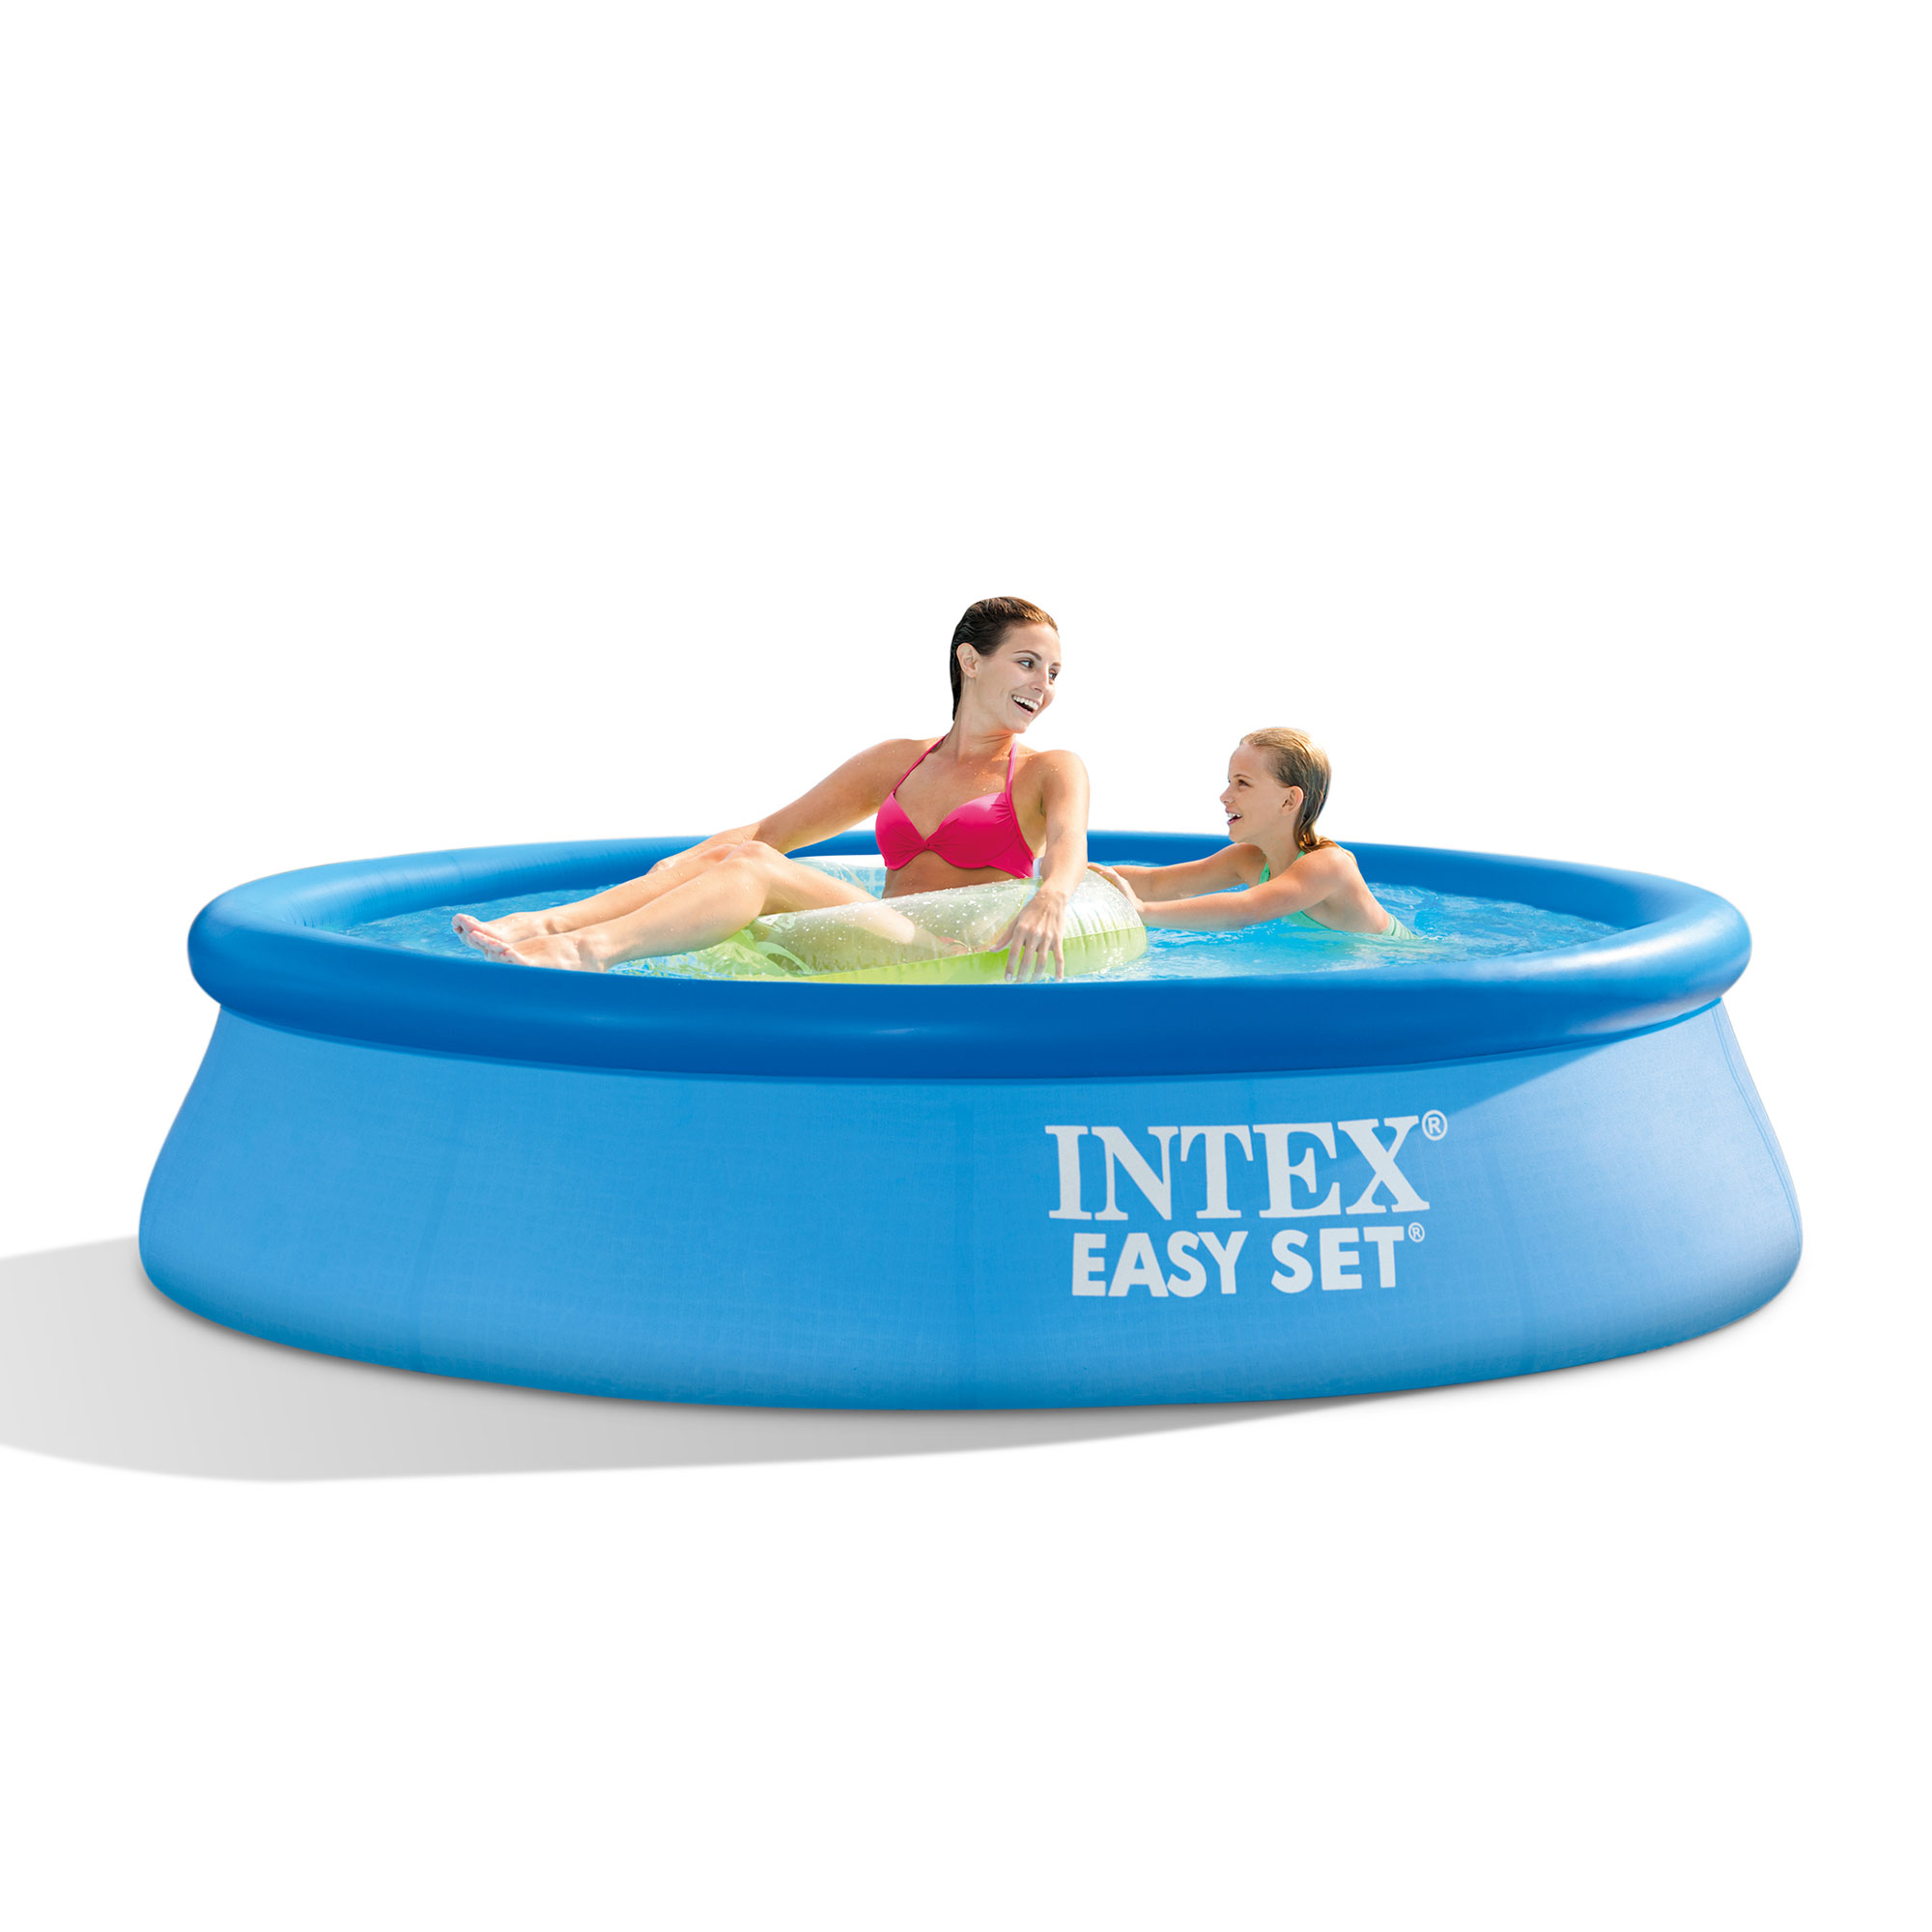 How To Maintain An Intex 15'x33 Easy Set Pool